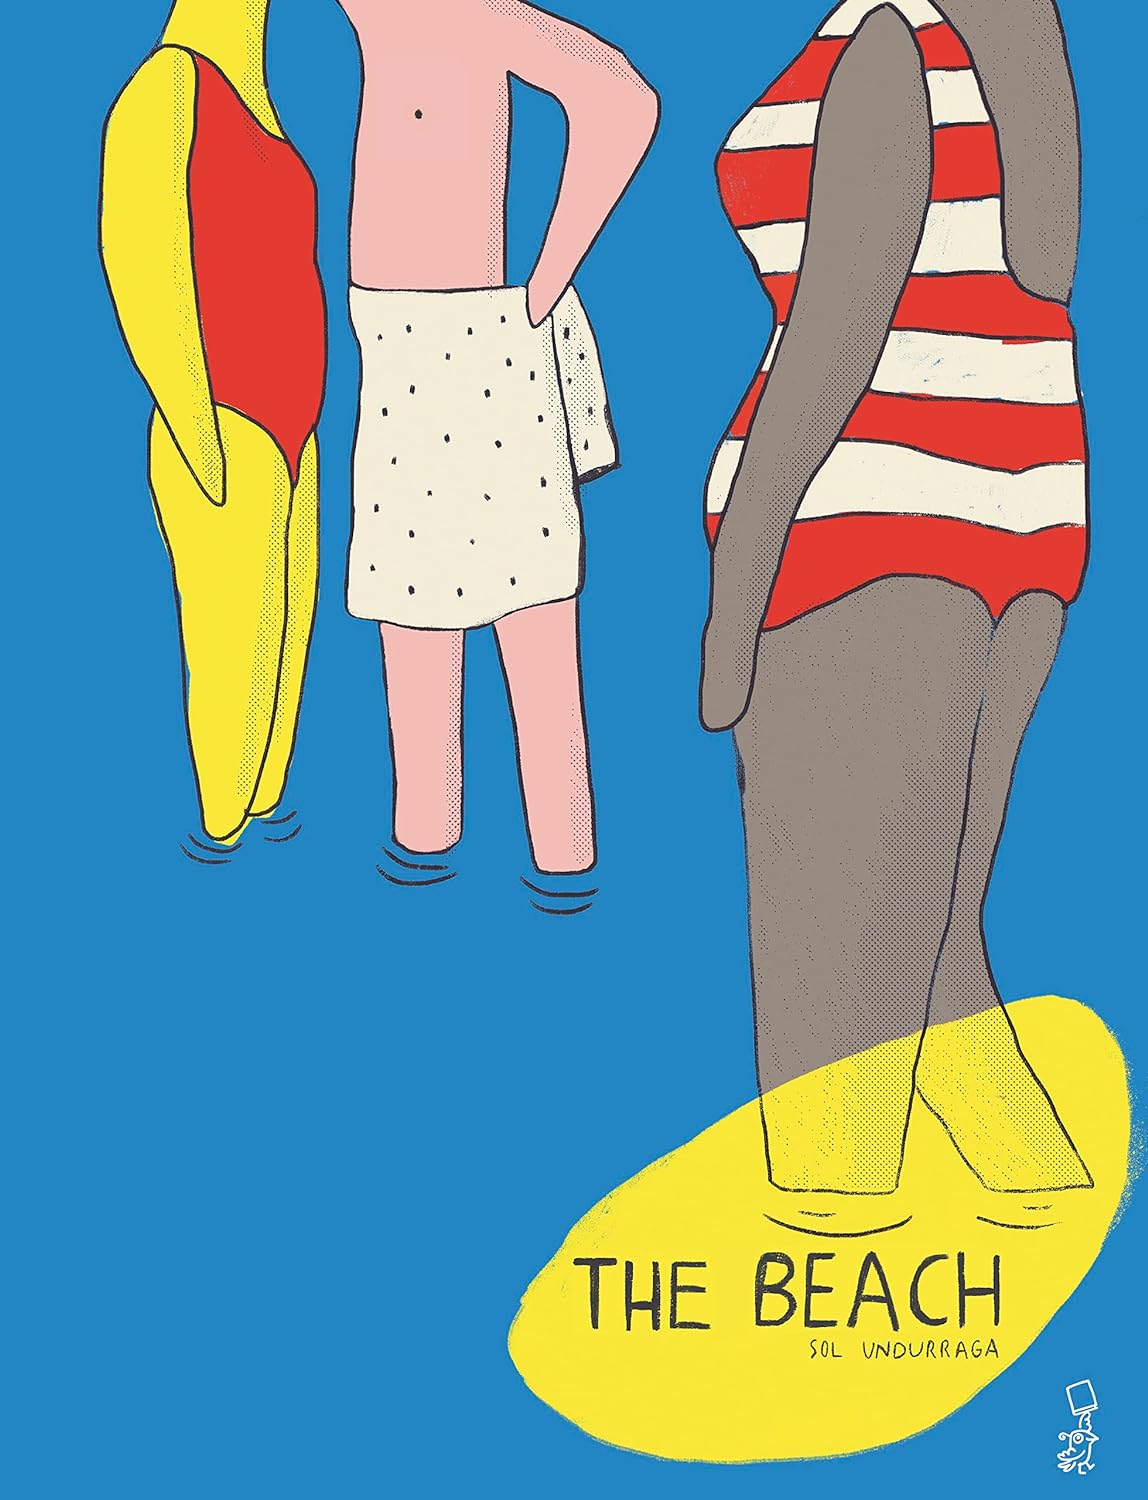 Cover of The Beach featuring an illustration of three people in swimsuits from the chest down with one person in the foreground and two in the background.